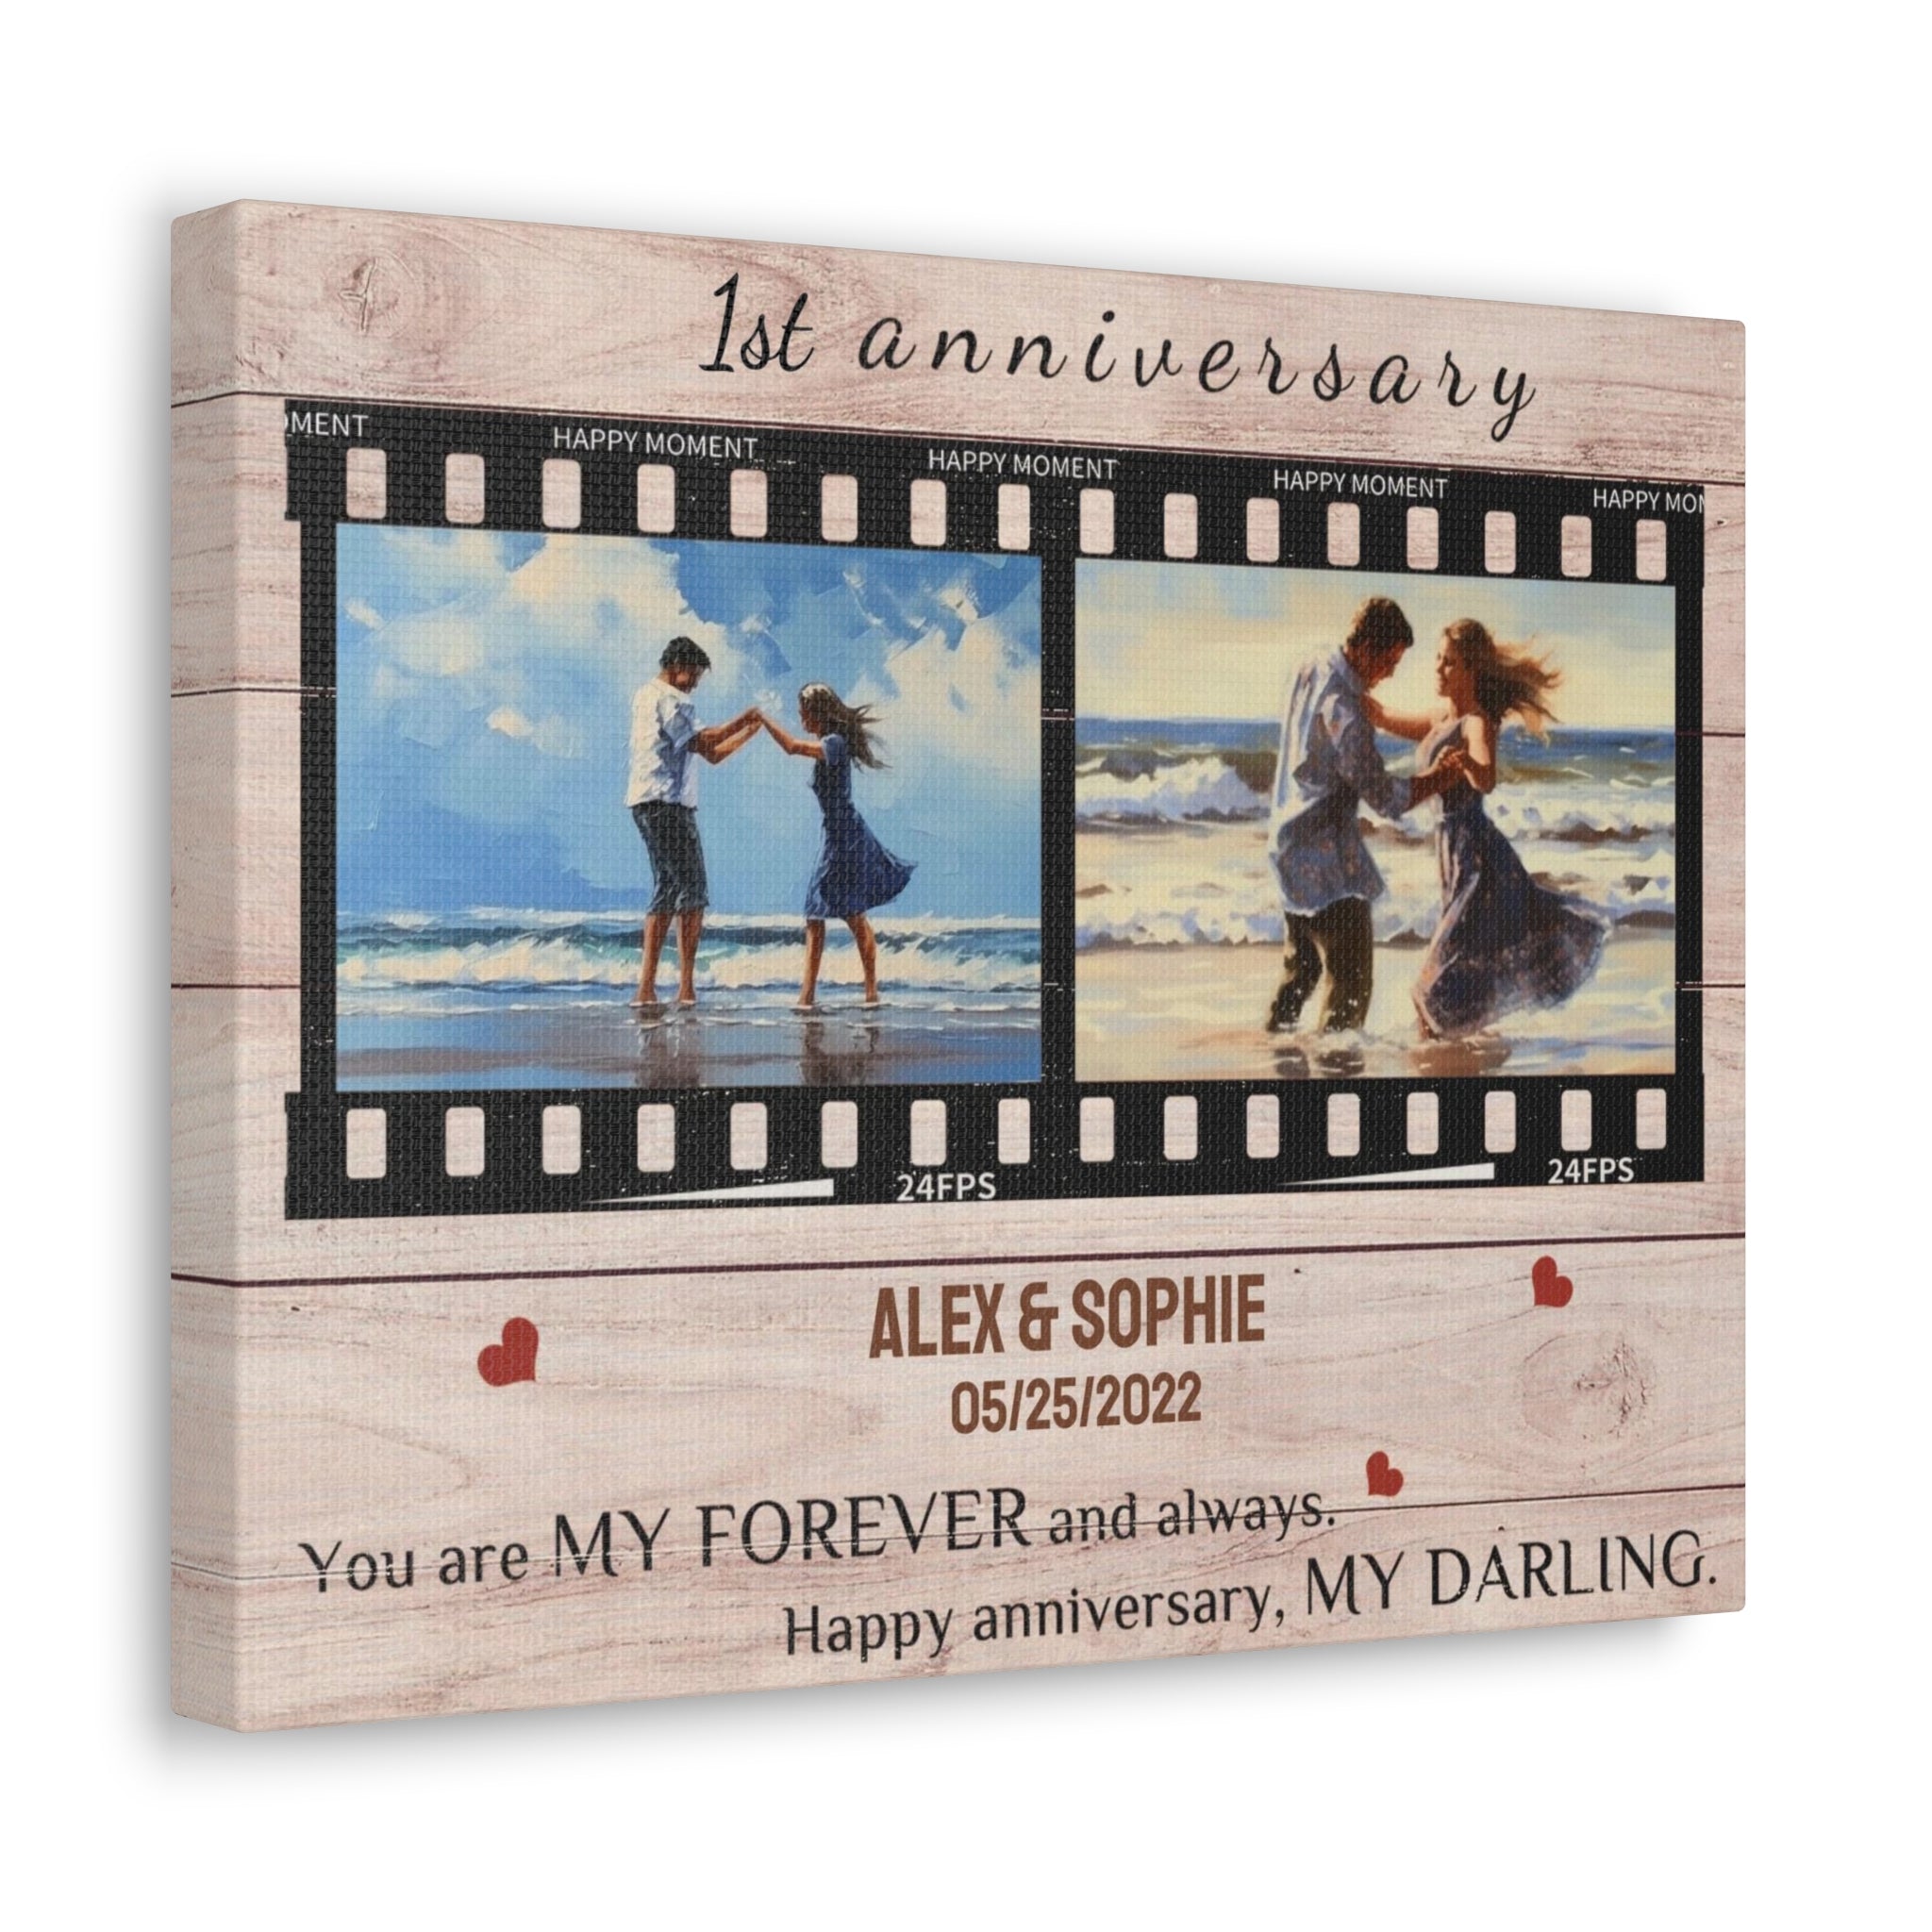 Happy Moments - Personalized Photo Canvas Print Anniversary Gifts